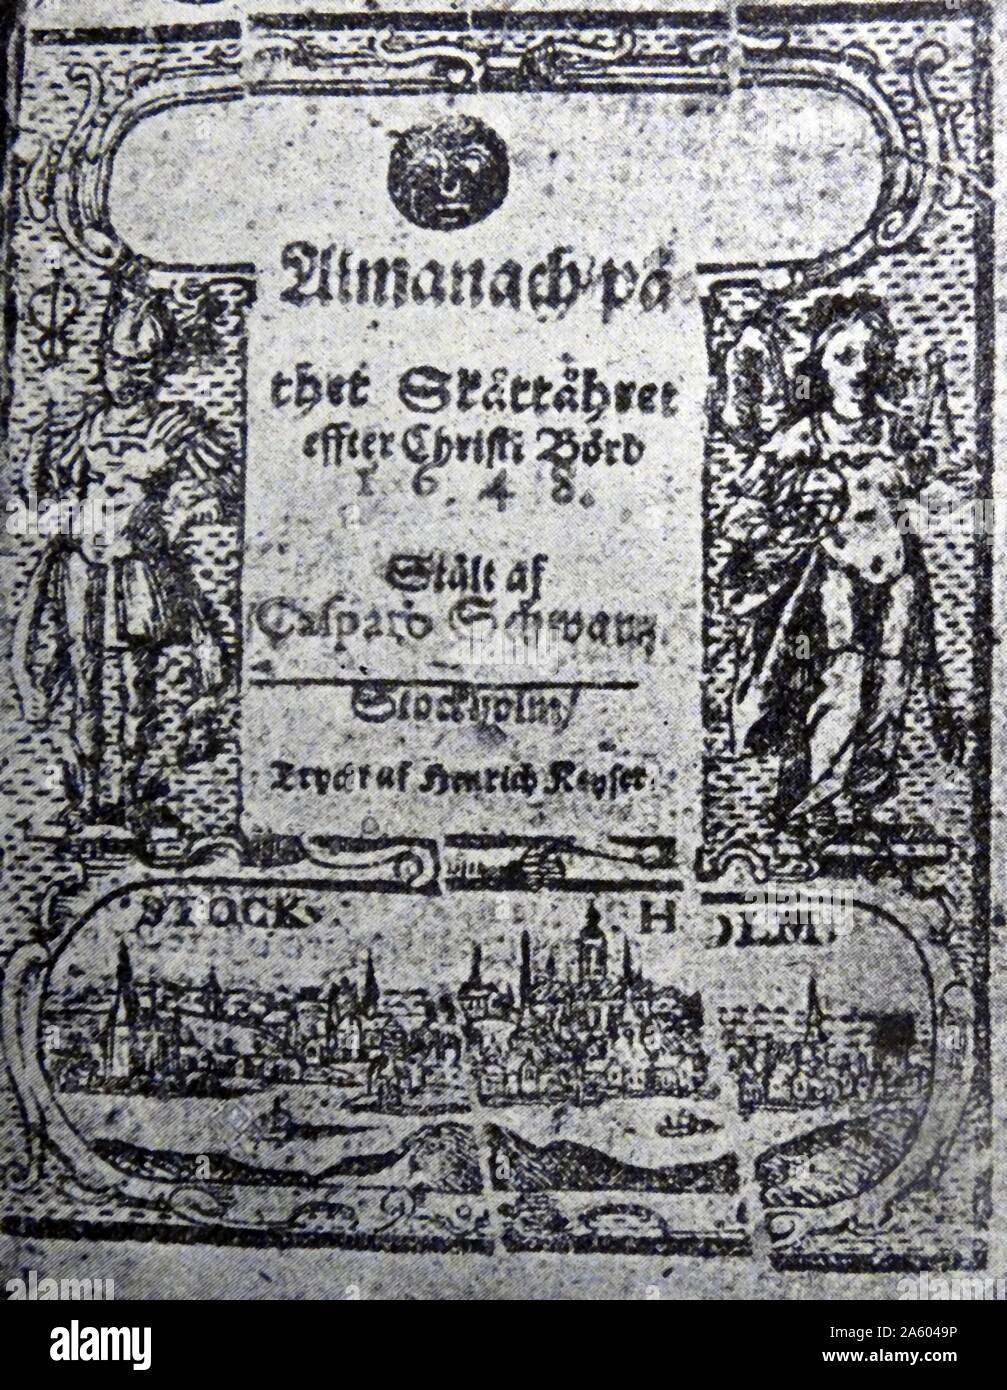 Copy of an Almanac, an annual publication, from the 17th Century. Dated 17th Century Stock Photo